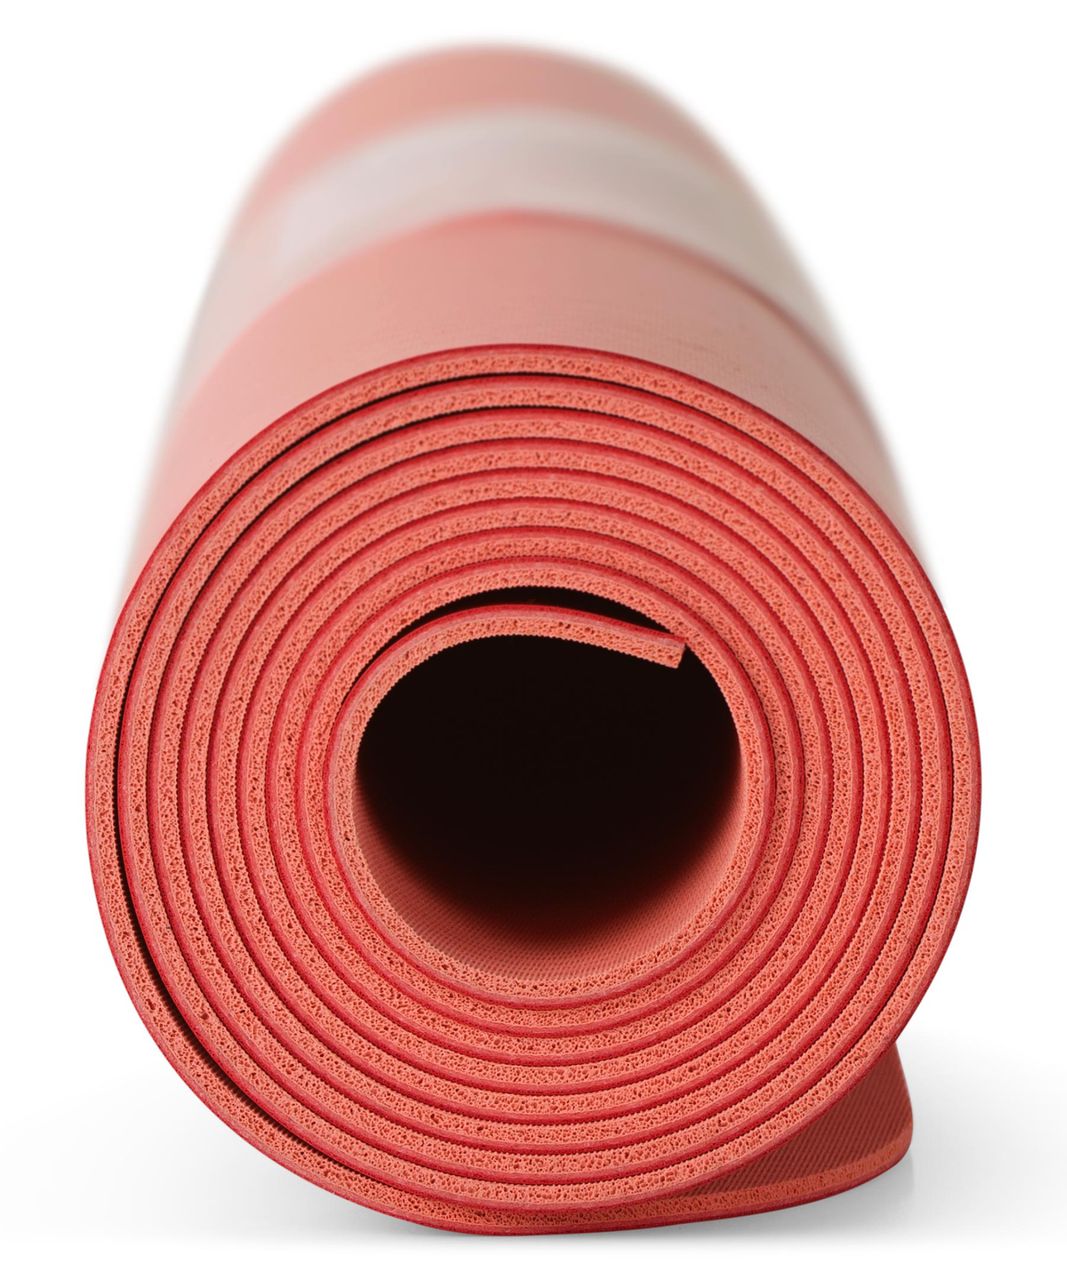 The Mat 3mm Made With FSC™ Certified Rubber